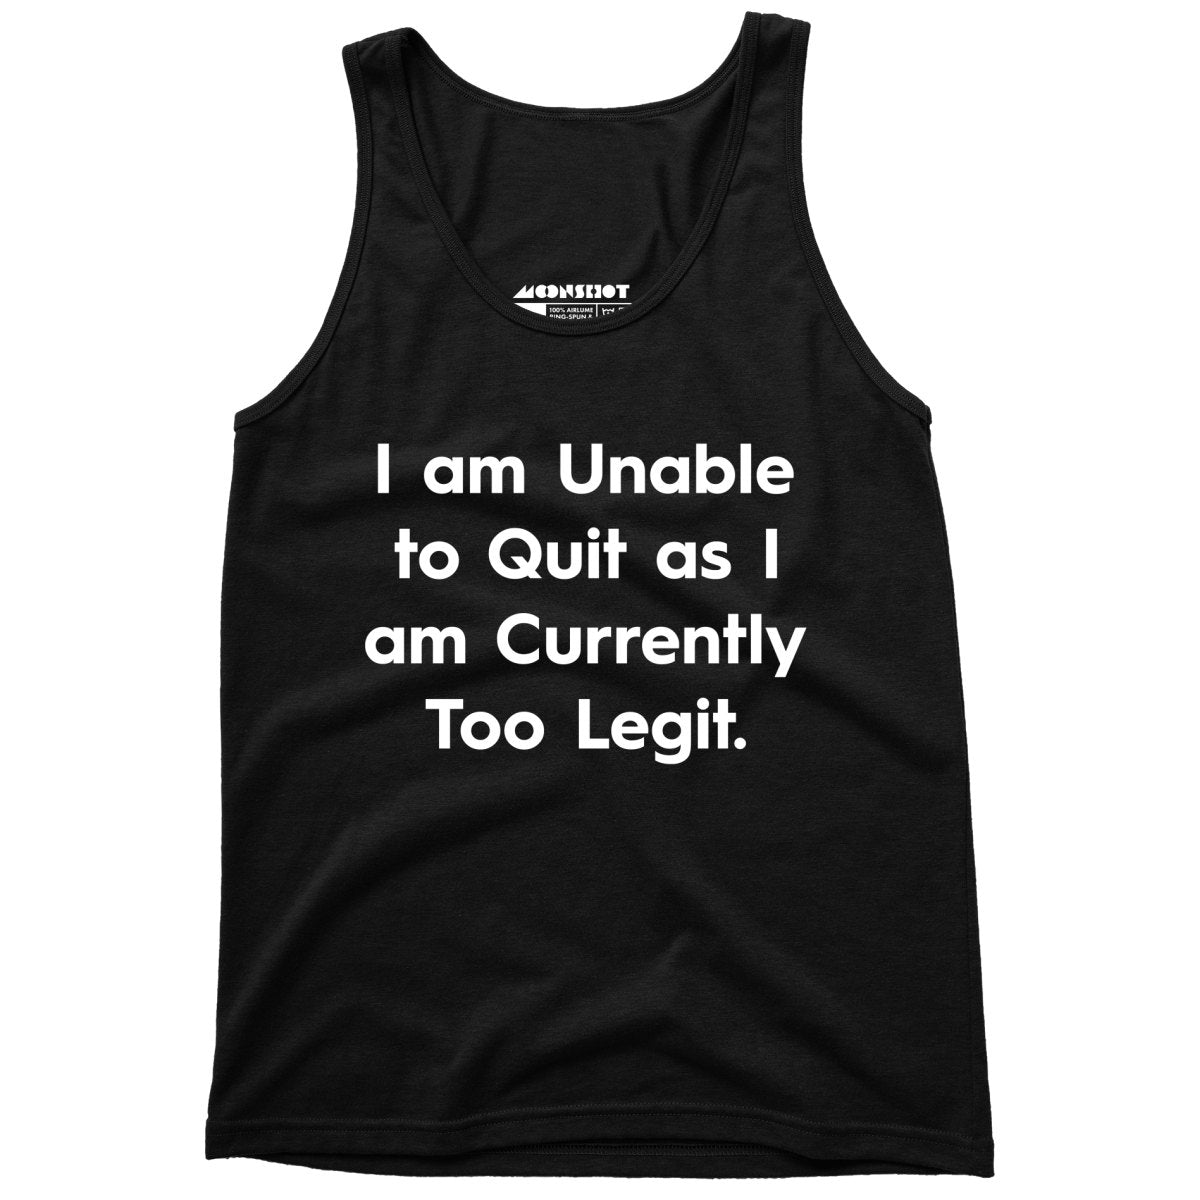 I am Unable to Quit as I am Currently Too Legit - Unisex Tank Top